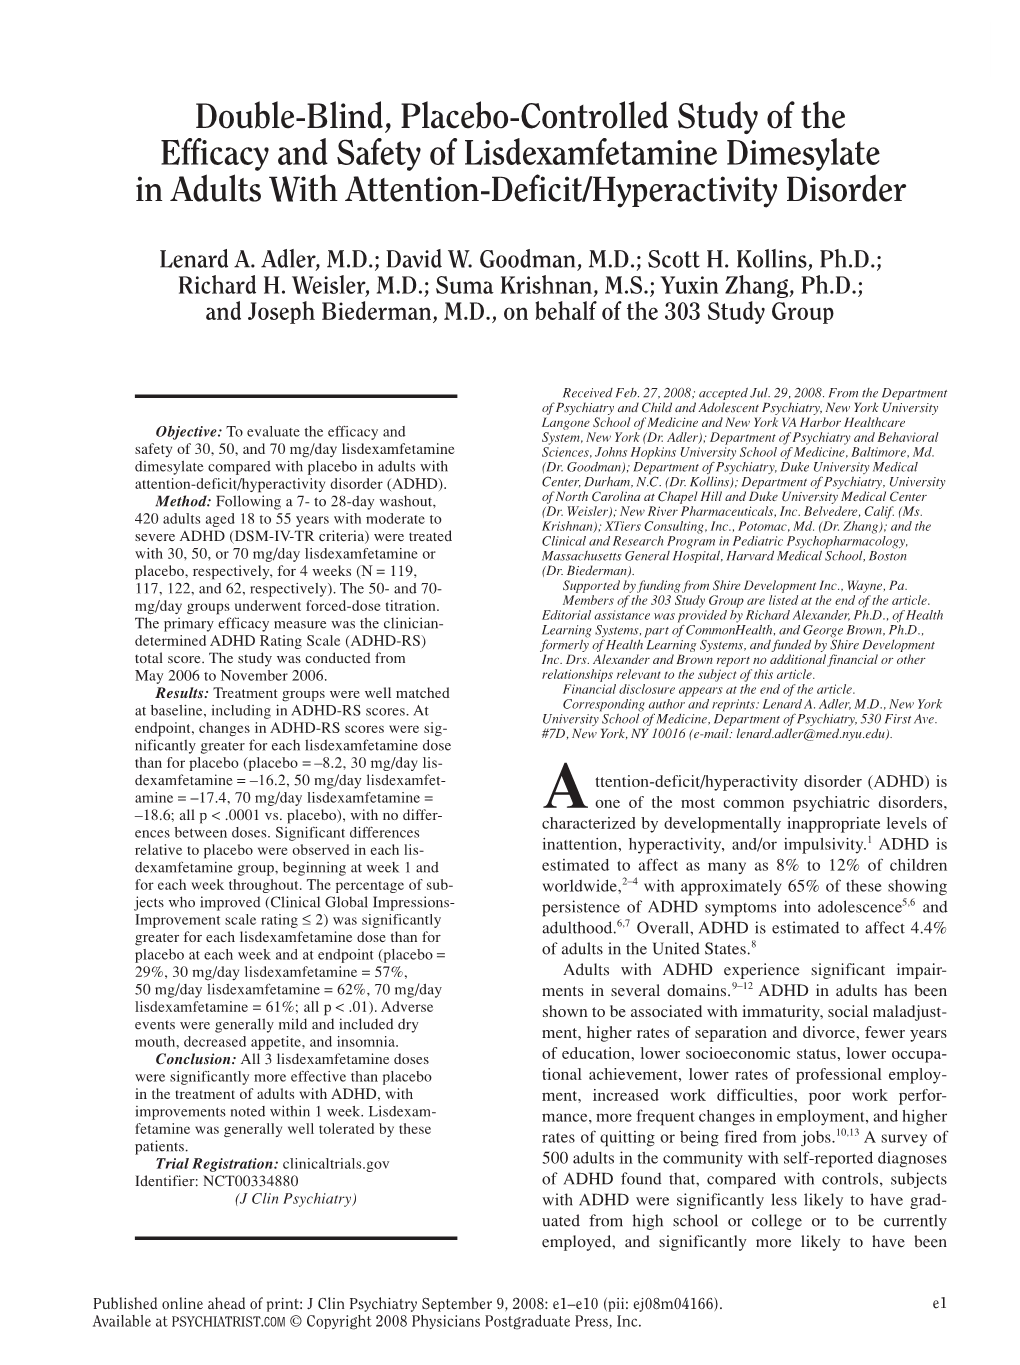 Double-Blind, Placebo-Controlled Study of the Efficacy and Safety of Lisdexamfetamine Dimesylate in Adults with Attention-Deficit/Hyperactivity Disorder